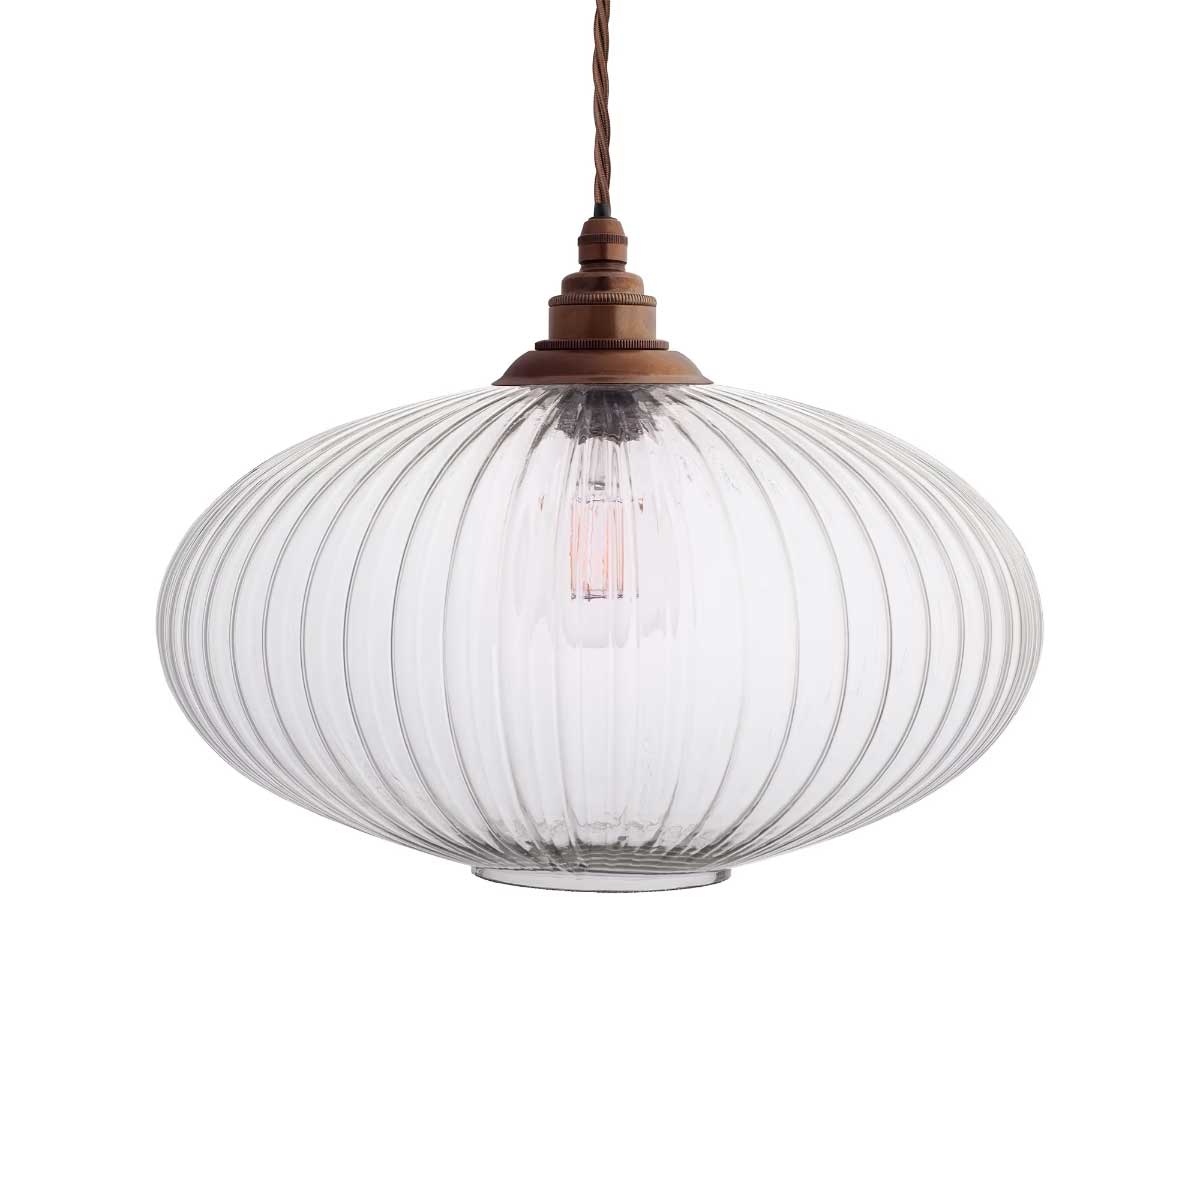 Henley Ellipse Glass Pendant Light with Small Cap - Old English Brass